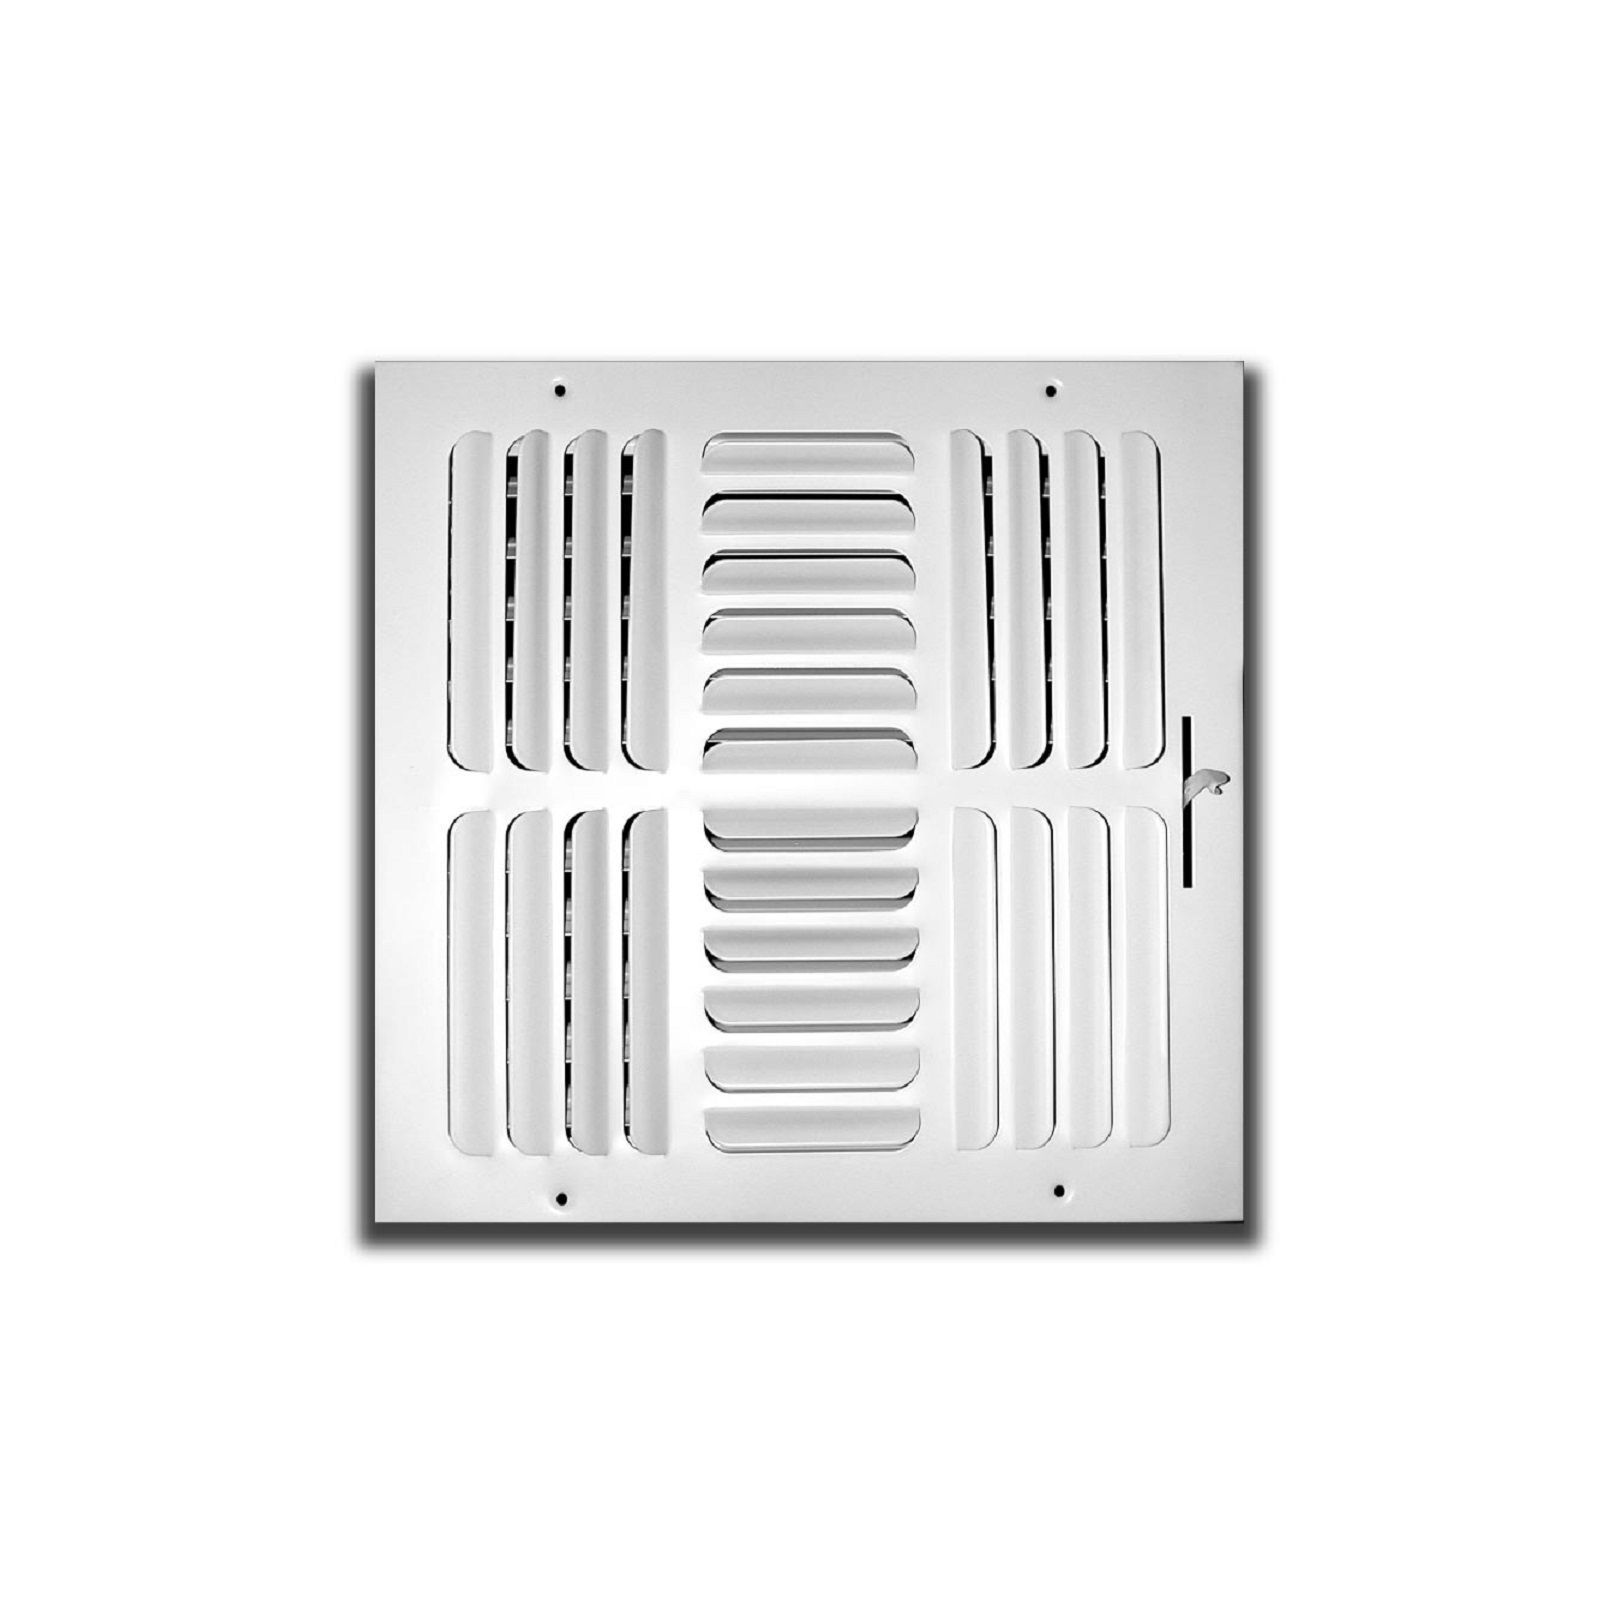 TRUaire 404M 14X14 - Fixed Curved Blade Wall/Ceiling Register With Multi Shutter Damper, 4-Way, White, 14" X 14"